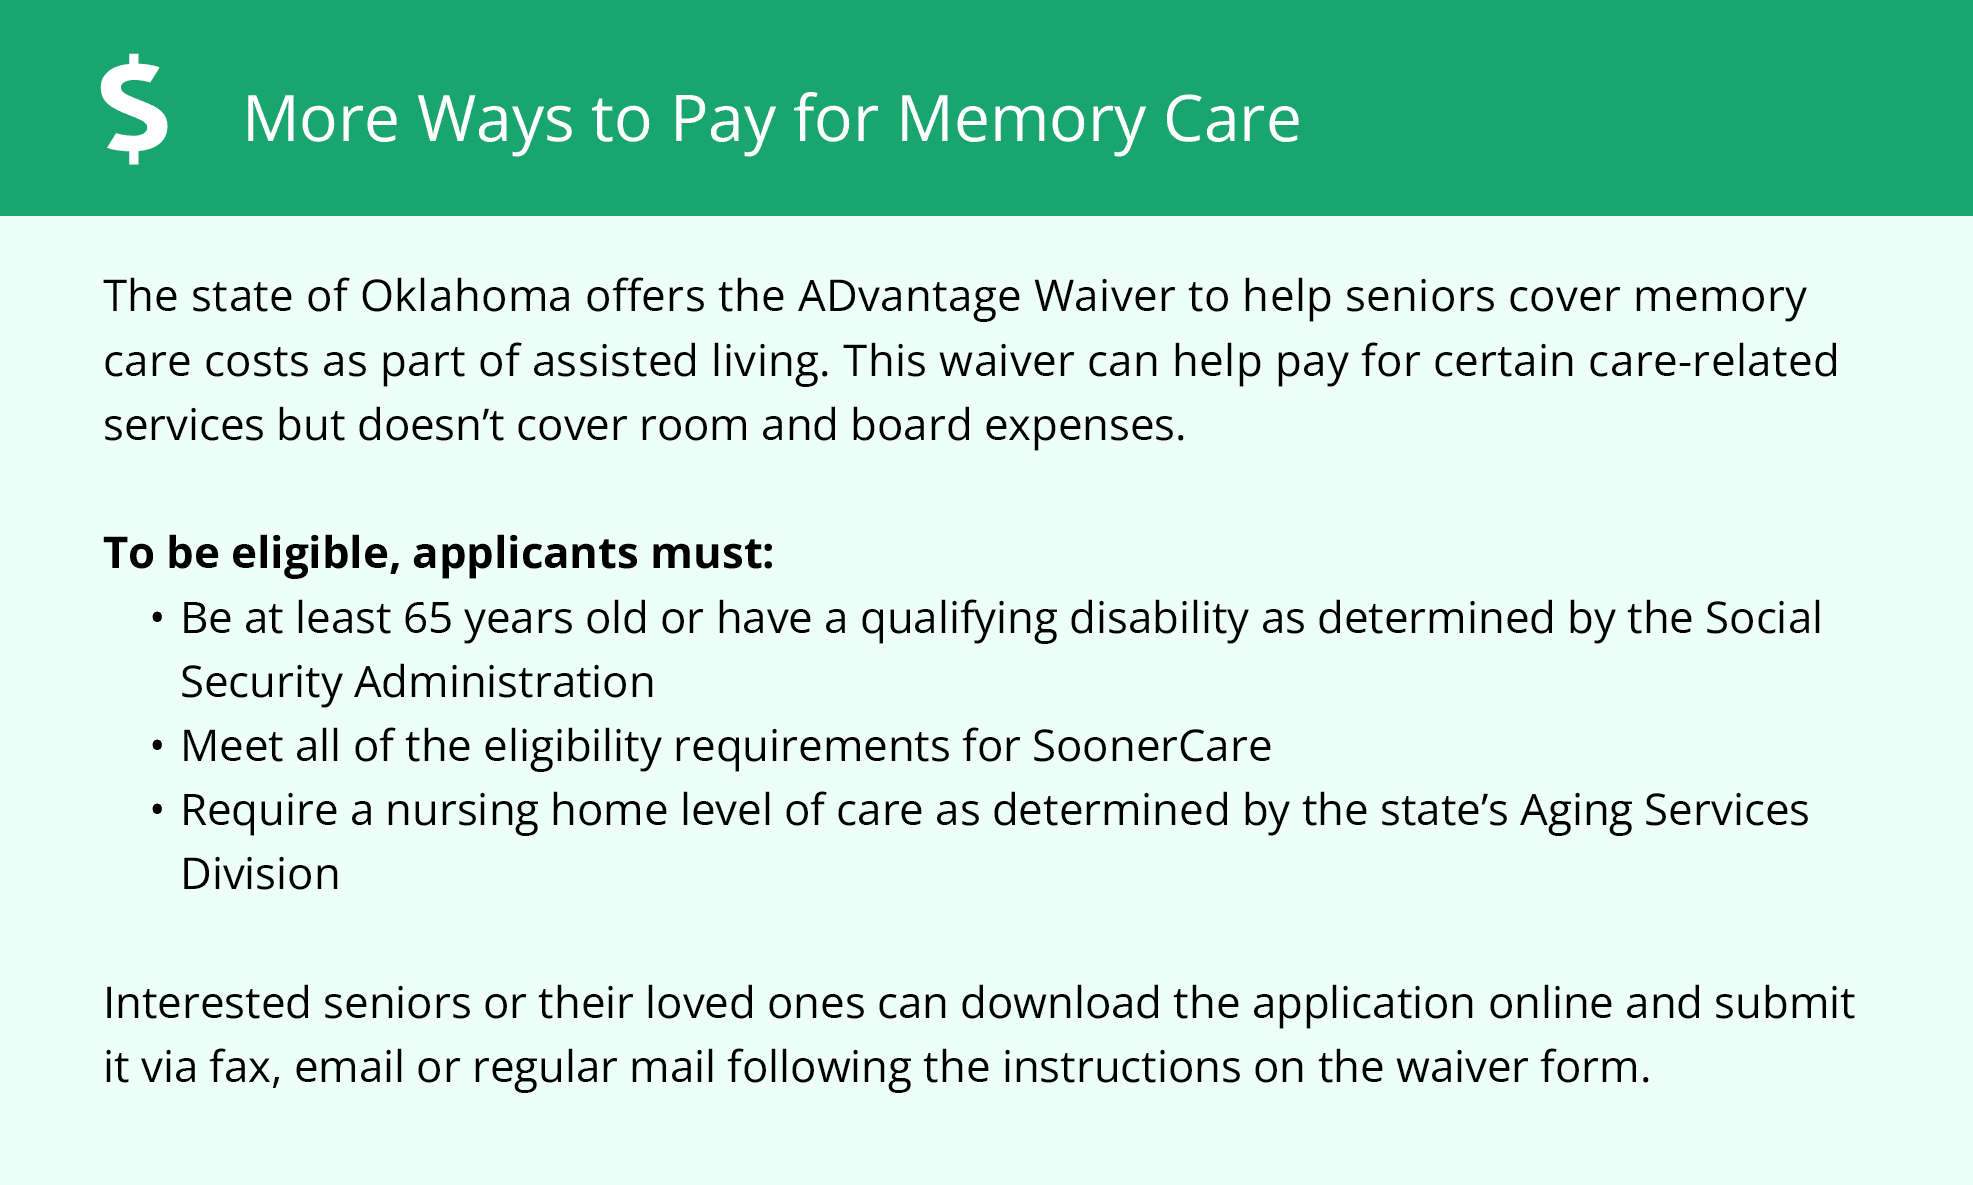 More Ways to Pay for Memory Care in Oklahoma